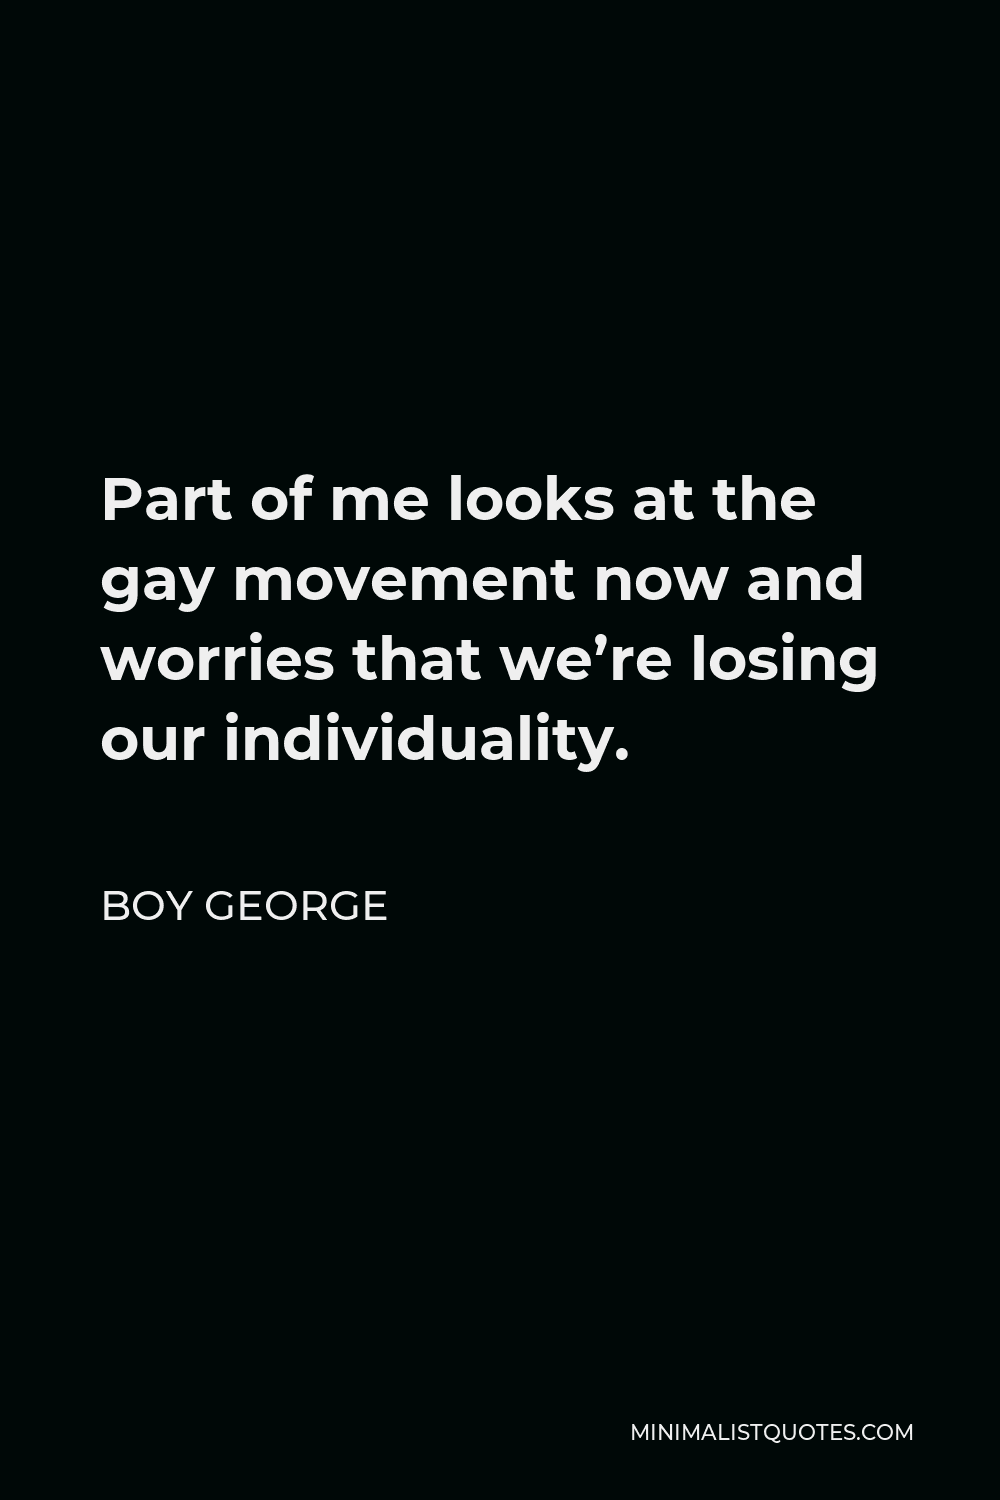 Boy George Quote - Part of me looks at the gay movement now and worries that we’re losing our individuality.